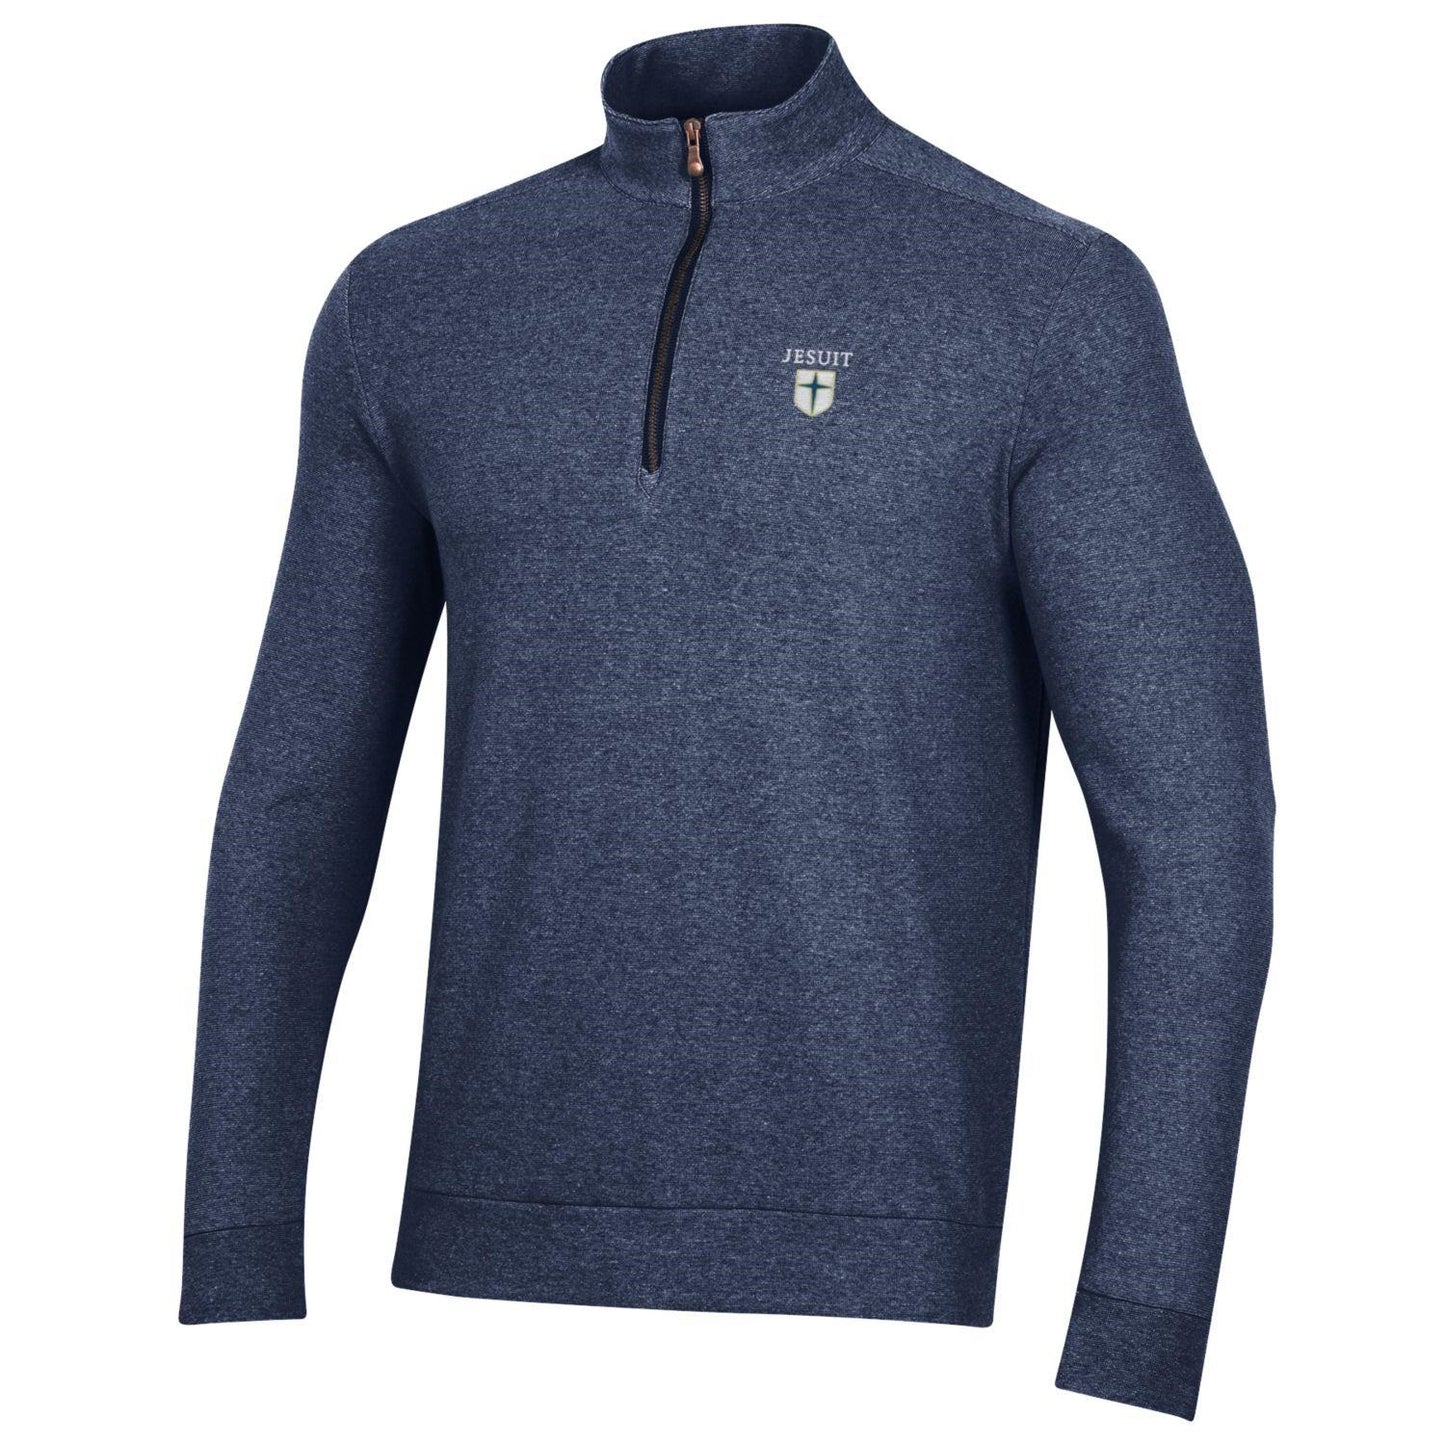 The Midway 1/4 zip (2 colors)